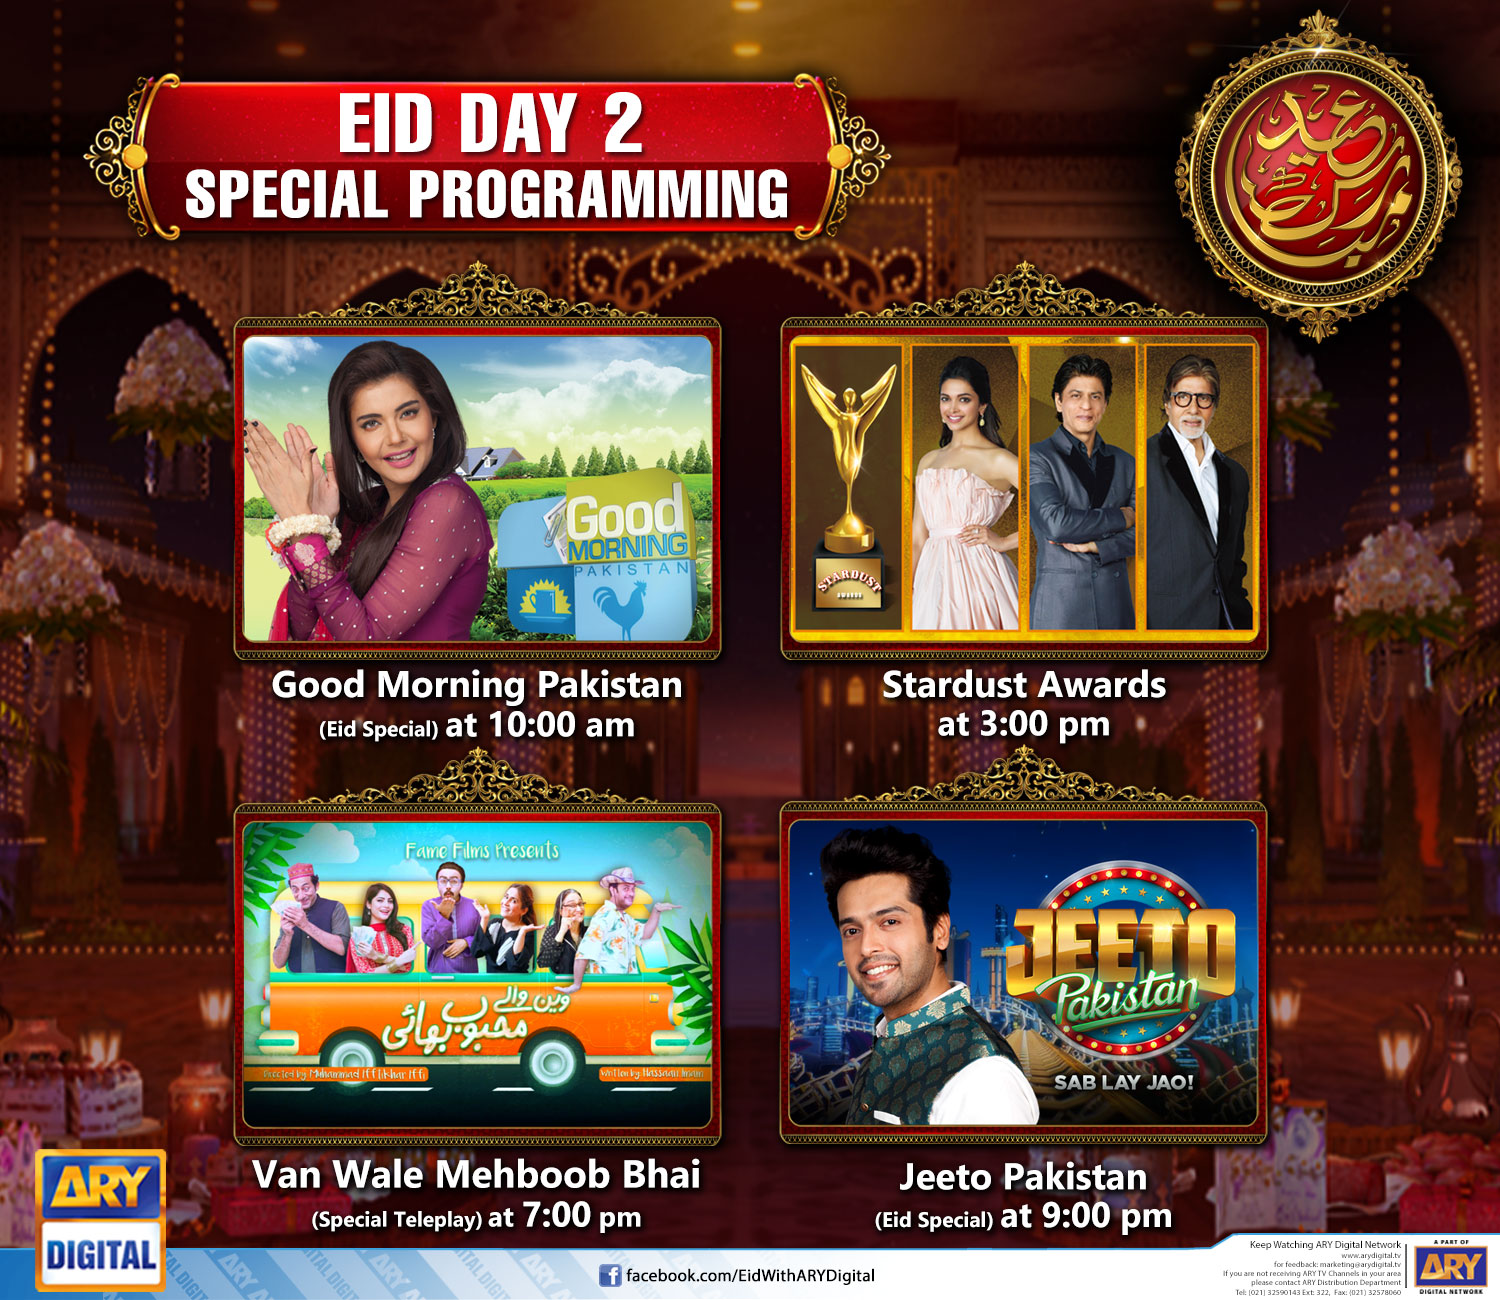 [Press Release] ARY Digital and ARY Zindagi brings exciting programs for Eid 2016 (2)